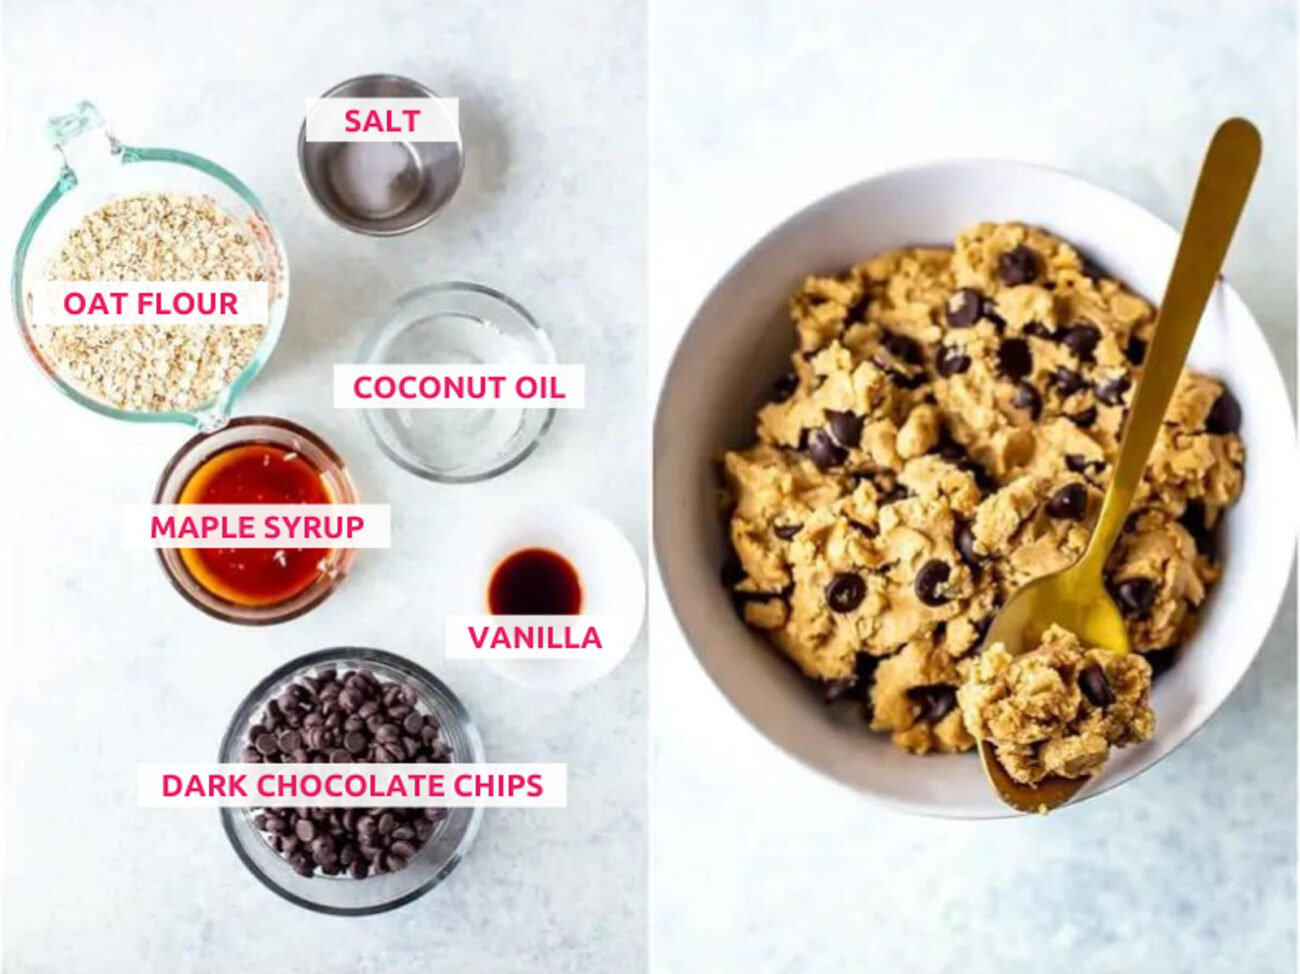 Ingredients for healthy edible cookie dough: oat flour, salt, maple syrup, coconut oil, dark chocolate chips and vanilla.